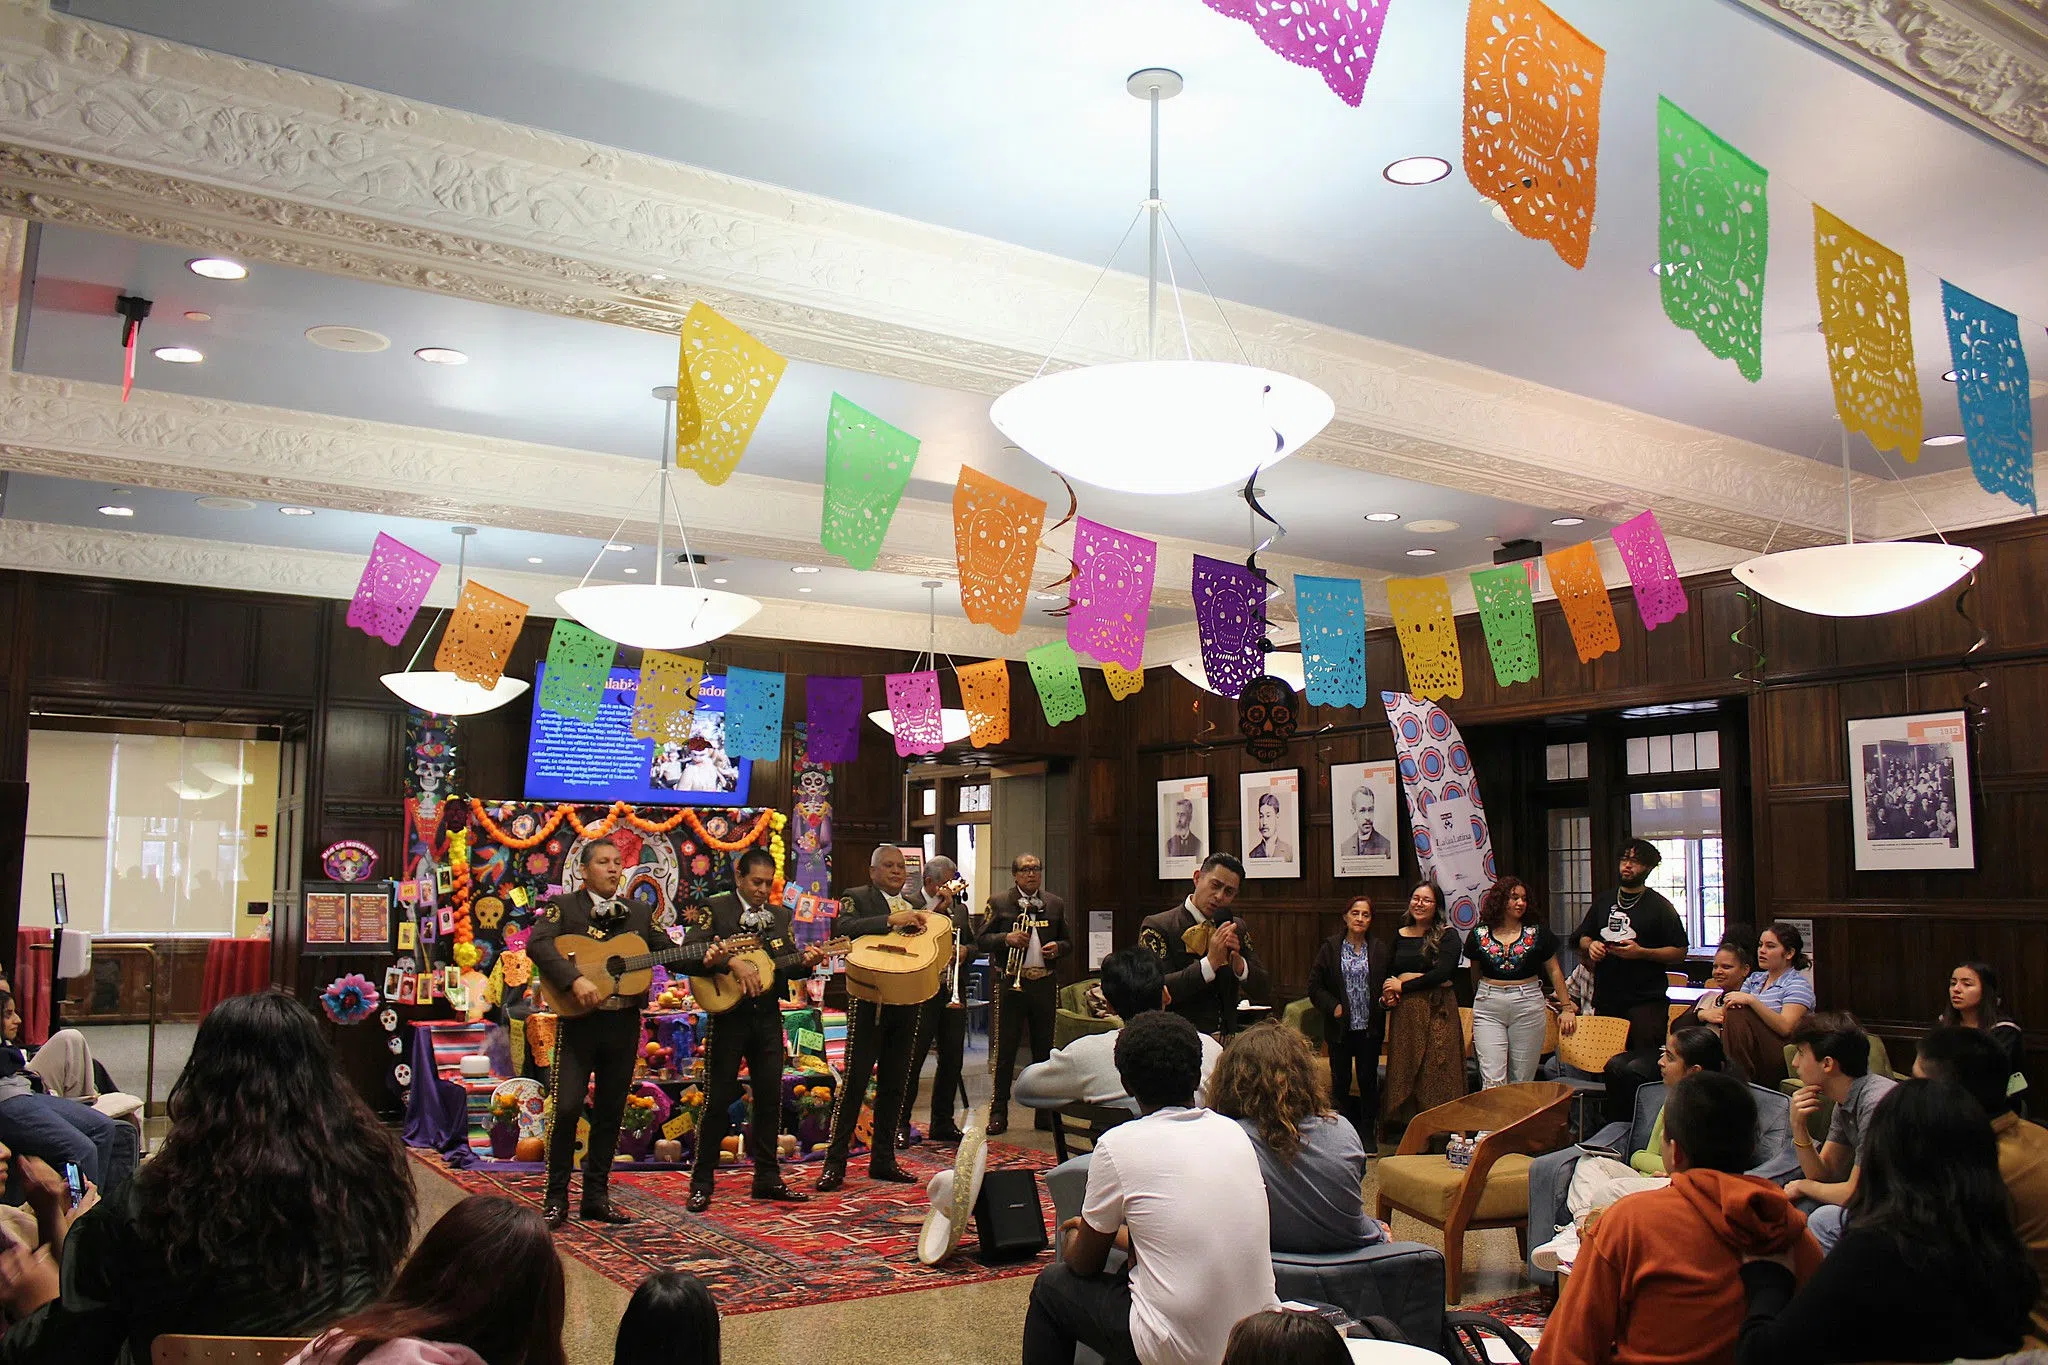 A group of students are listening to a Mariachi band in traditional clothing. They are gathered in a large space decorated with colorful paper garlands where a large ofrenda (or altar) has been constructed, which is customary for the Day of the Day. 